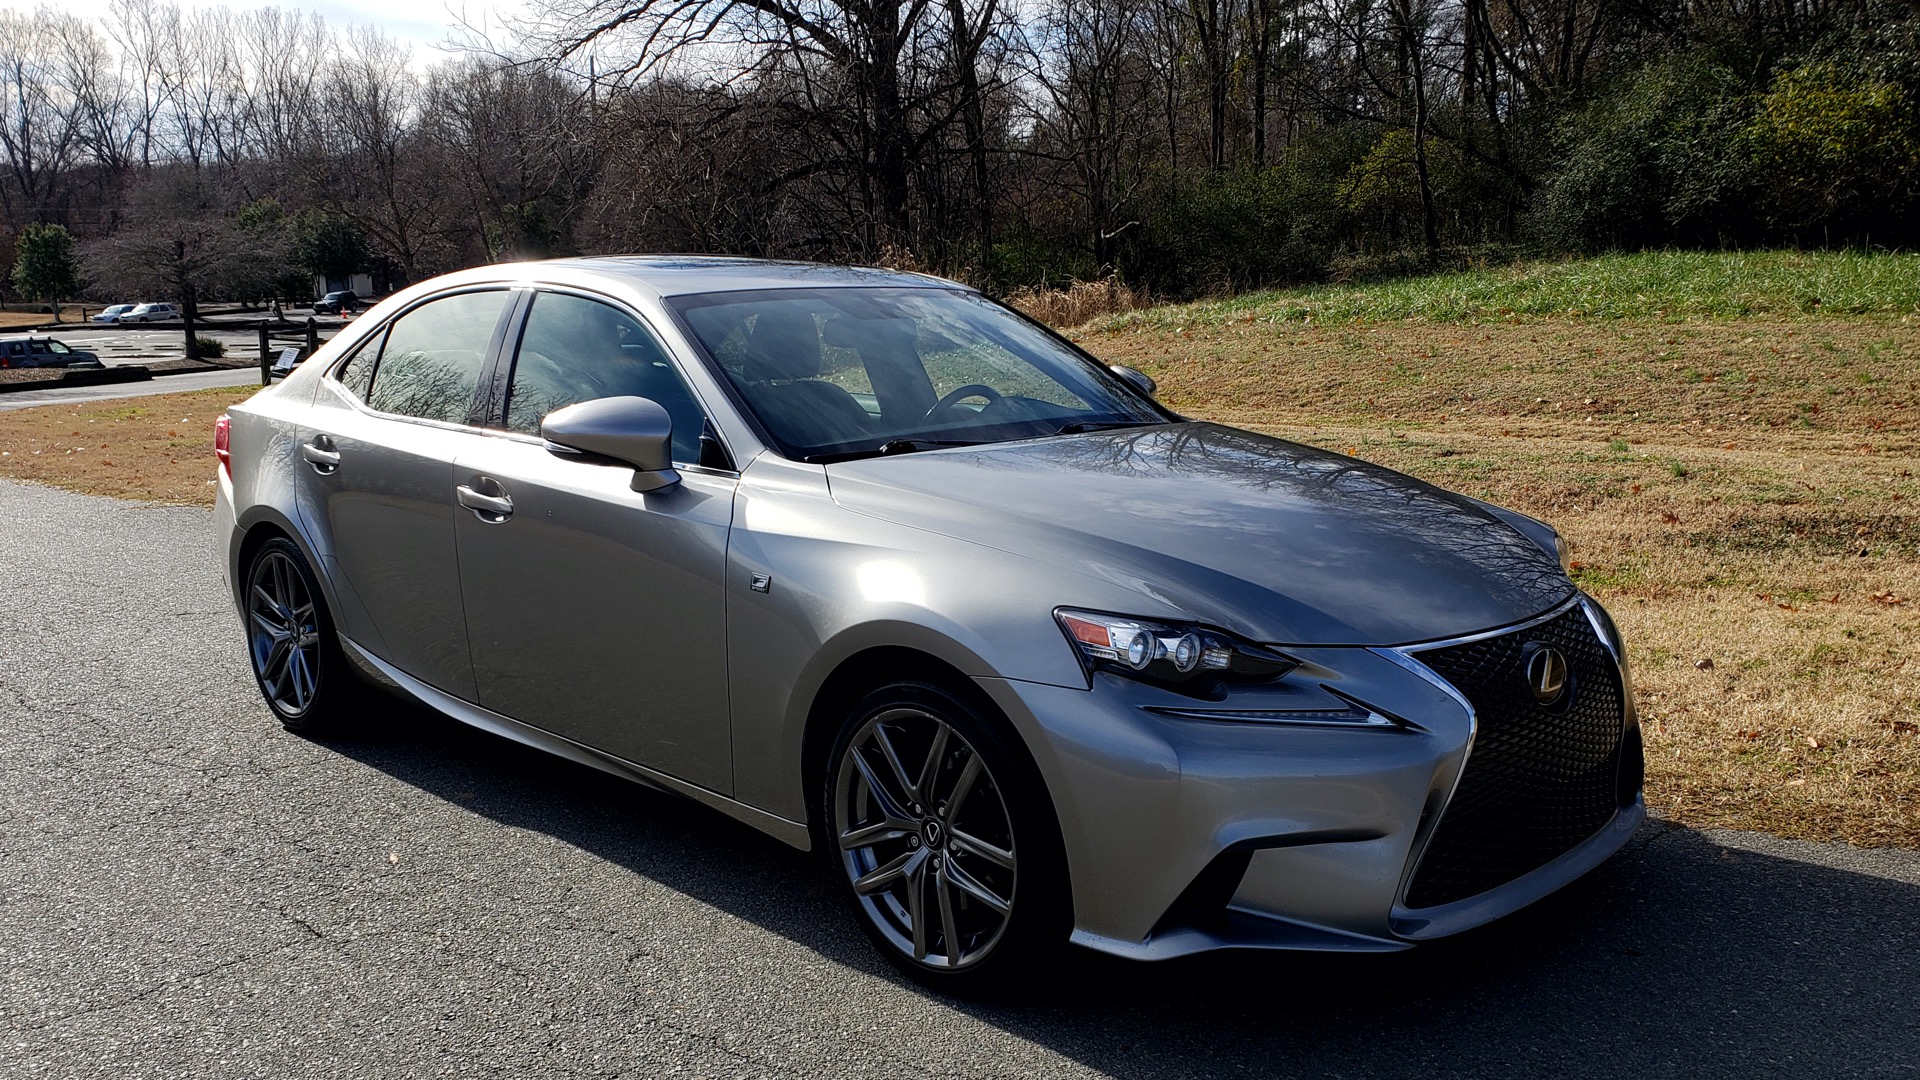 Used 2016 Lexus IS 200t F-SPORT / SUNROOF / NAV / BSM / DYNAMIC RADAR CRUISE for sale Sold at Formula Imports in Charlotte NC 28227 11